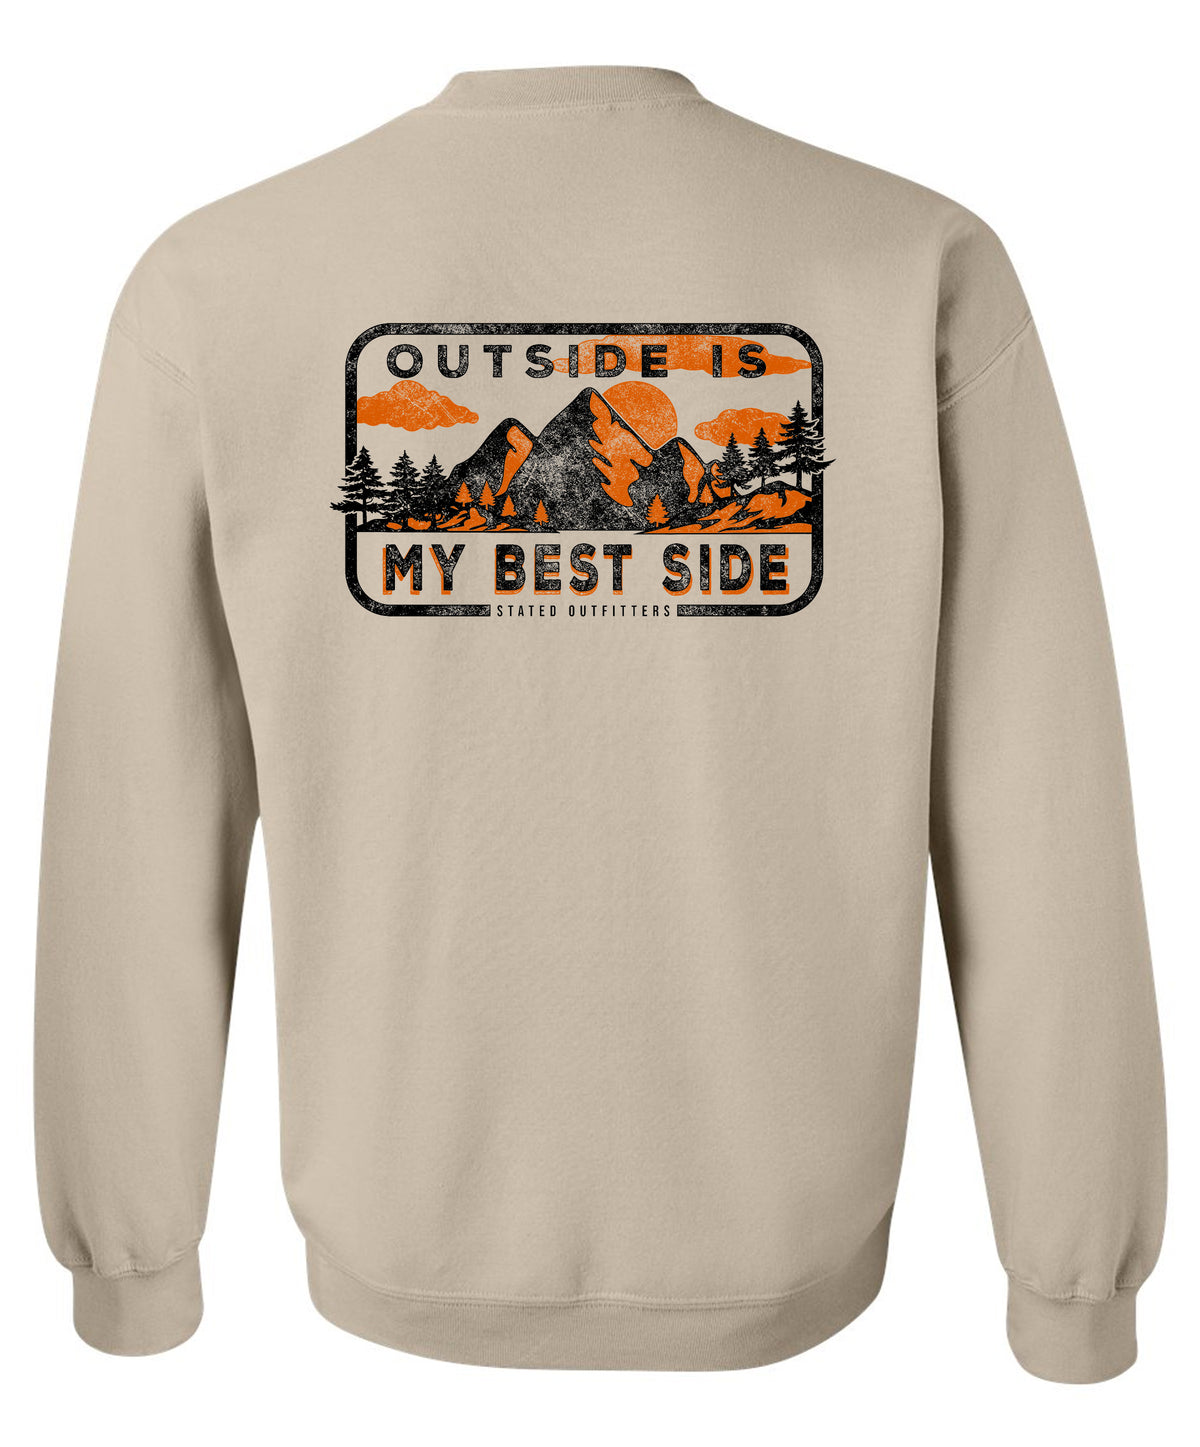 Stated Outfitters My Best Side Sweatshirt